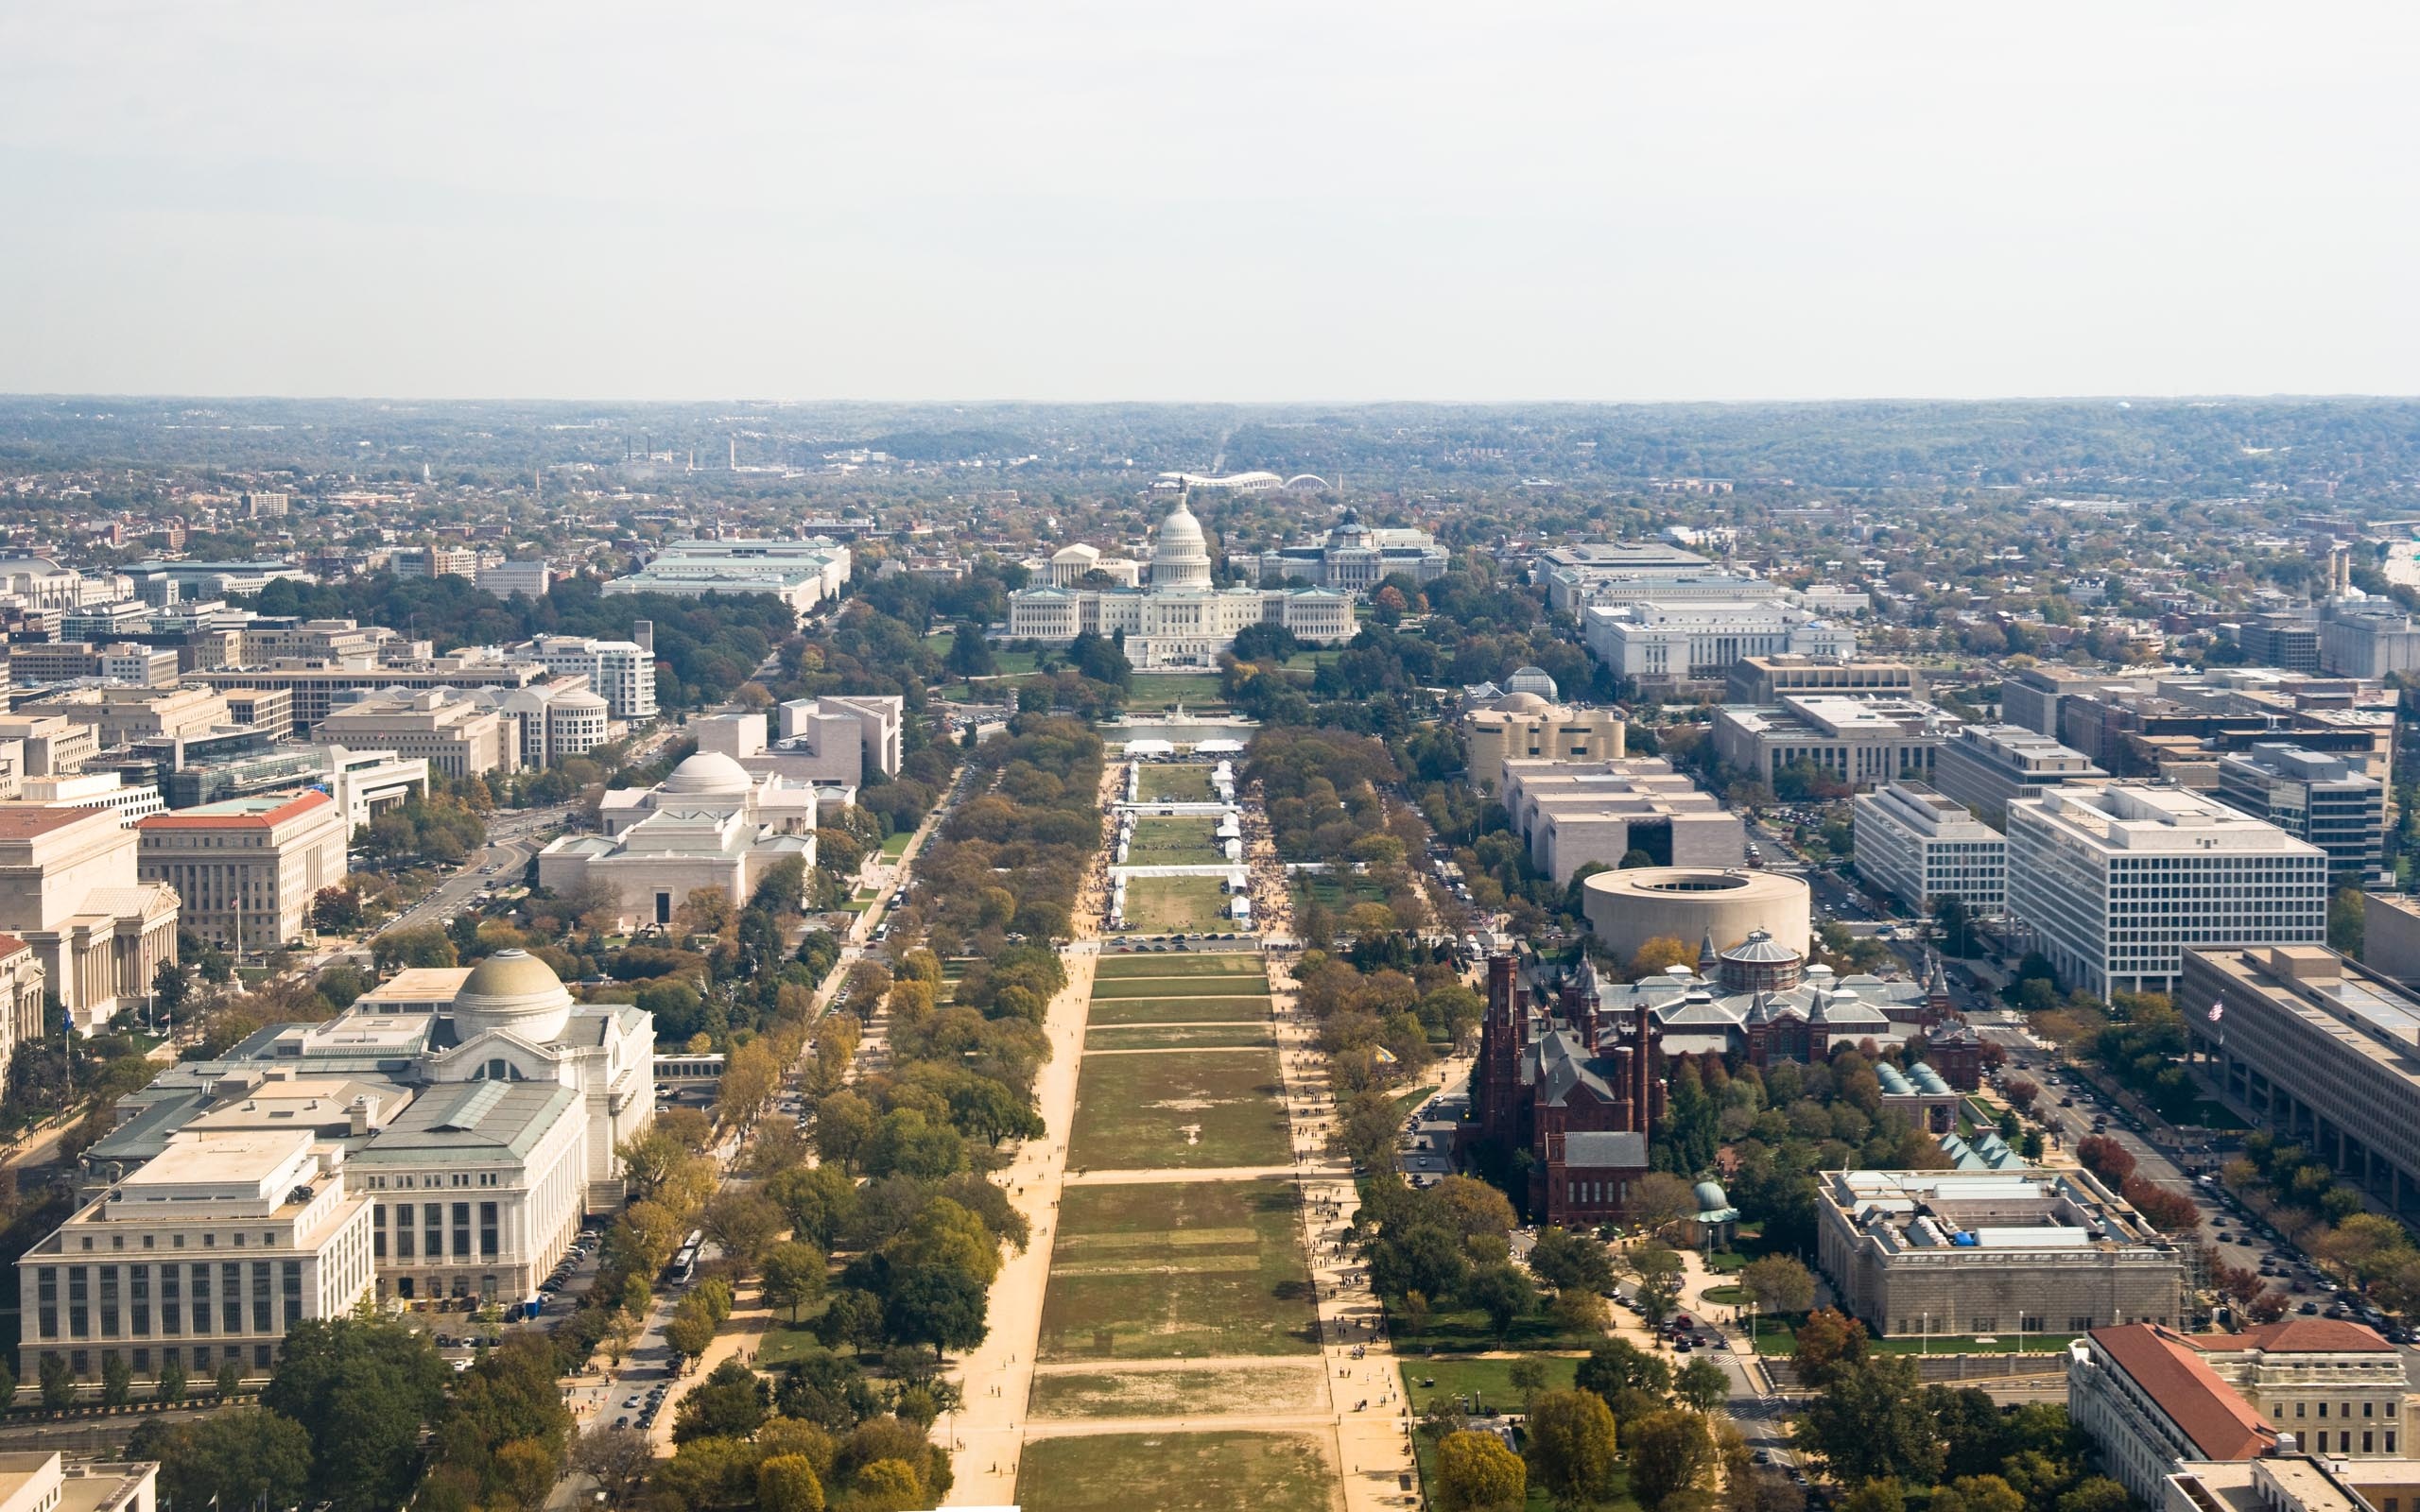 Washington, D.C.: Home to many national monuments and museums, primarily located on or around the National Mall, including the Jefferson Memorial, the Lincoln Memorial, and the Washington Monument. 2560x1600 HD Wallpaper.